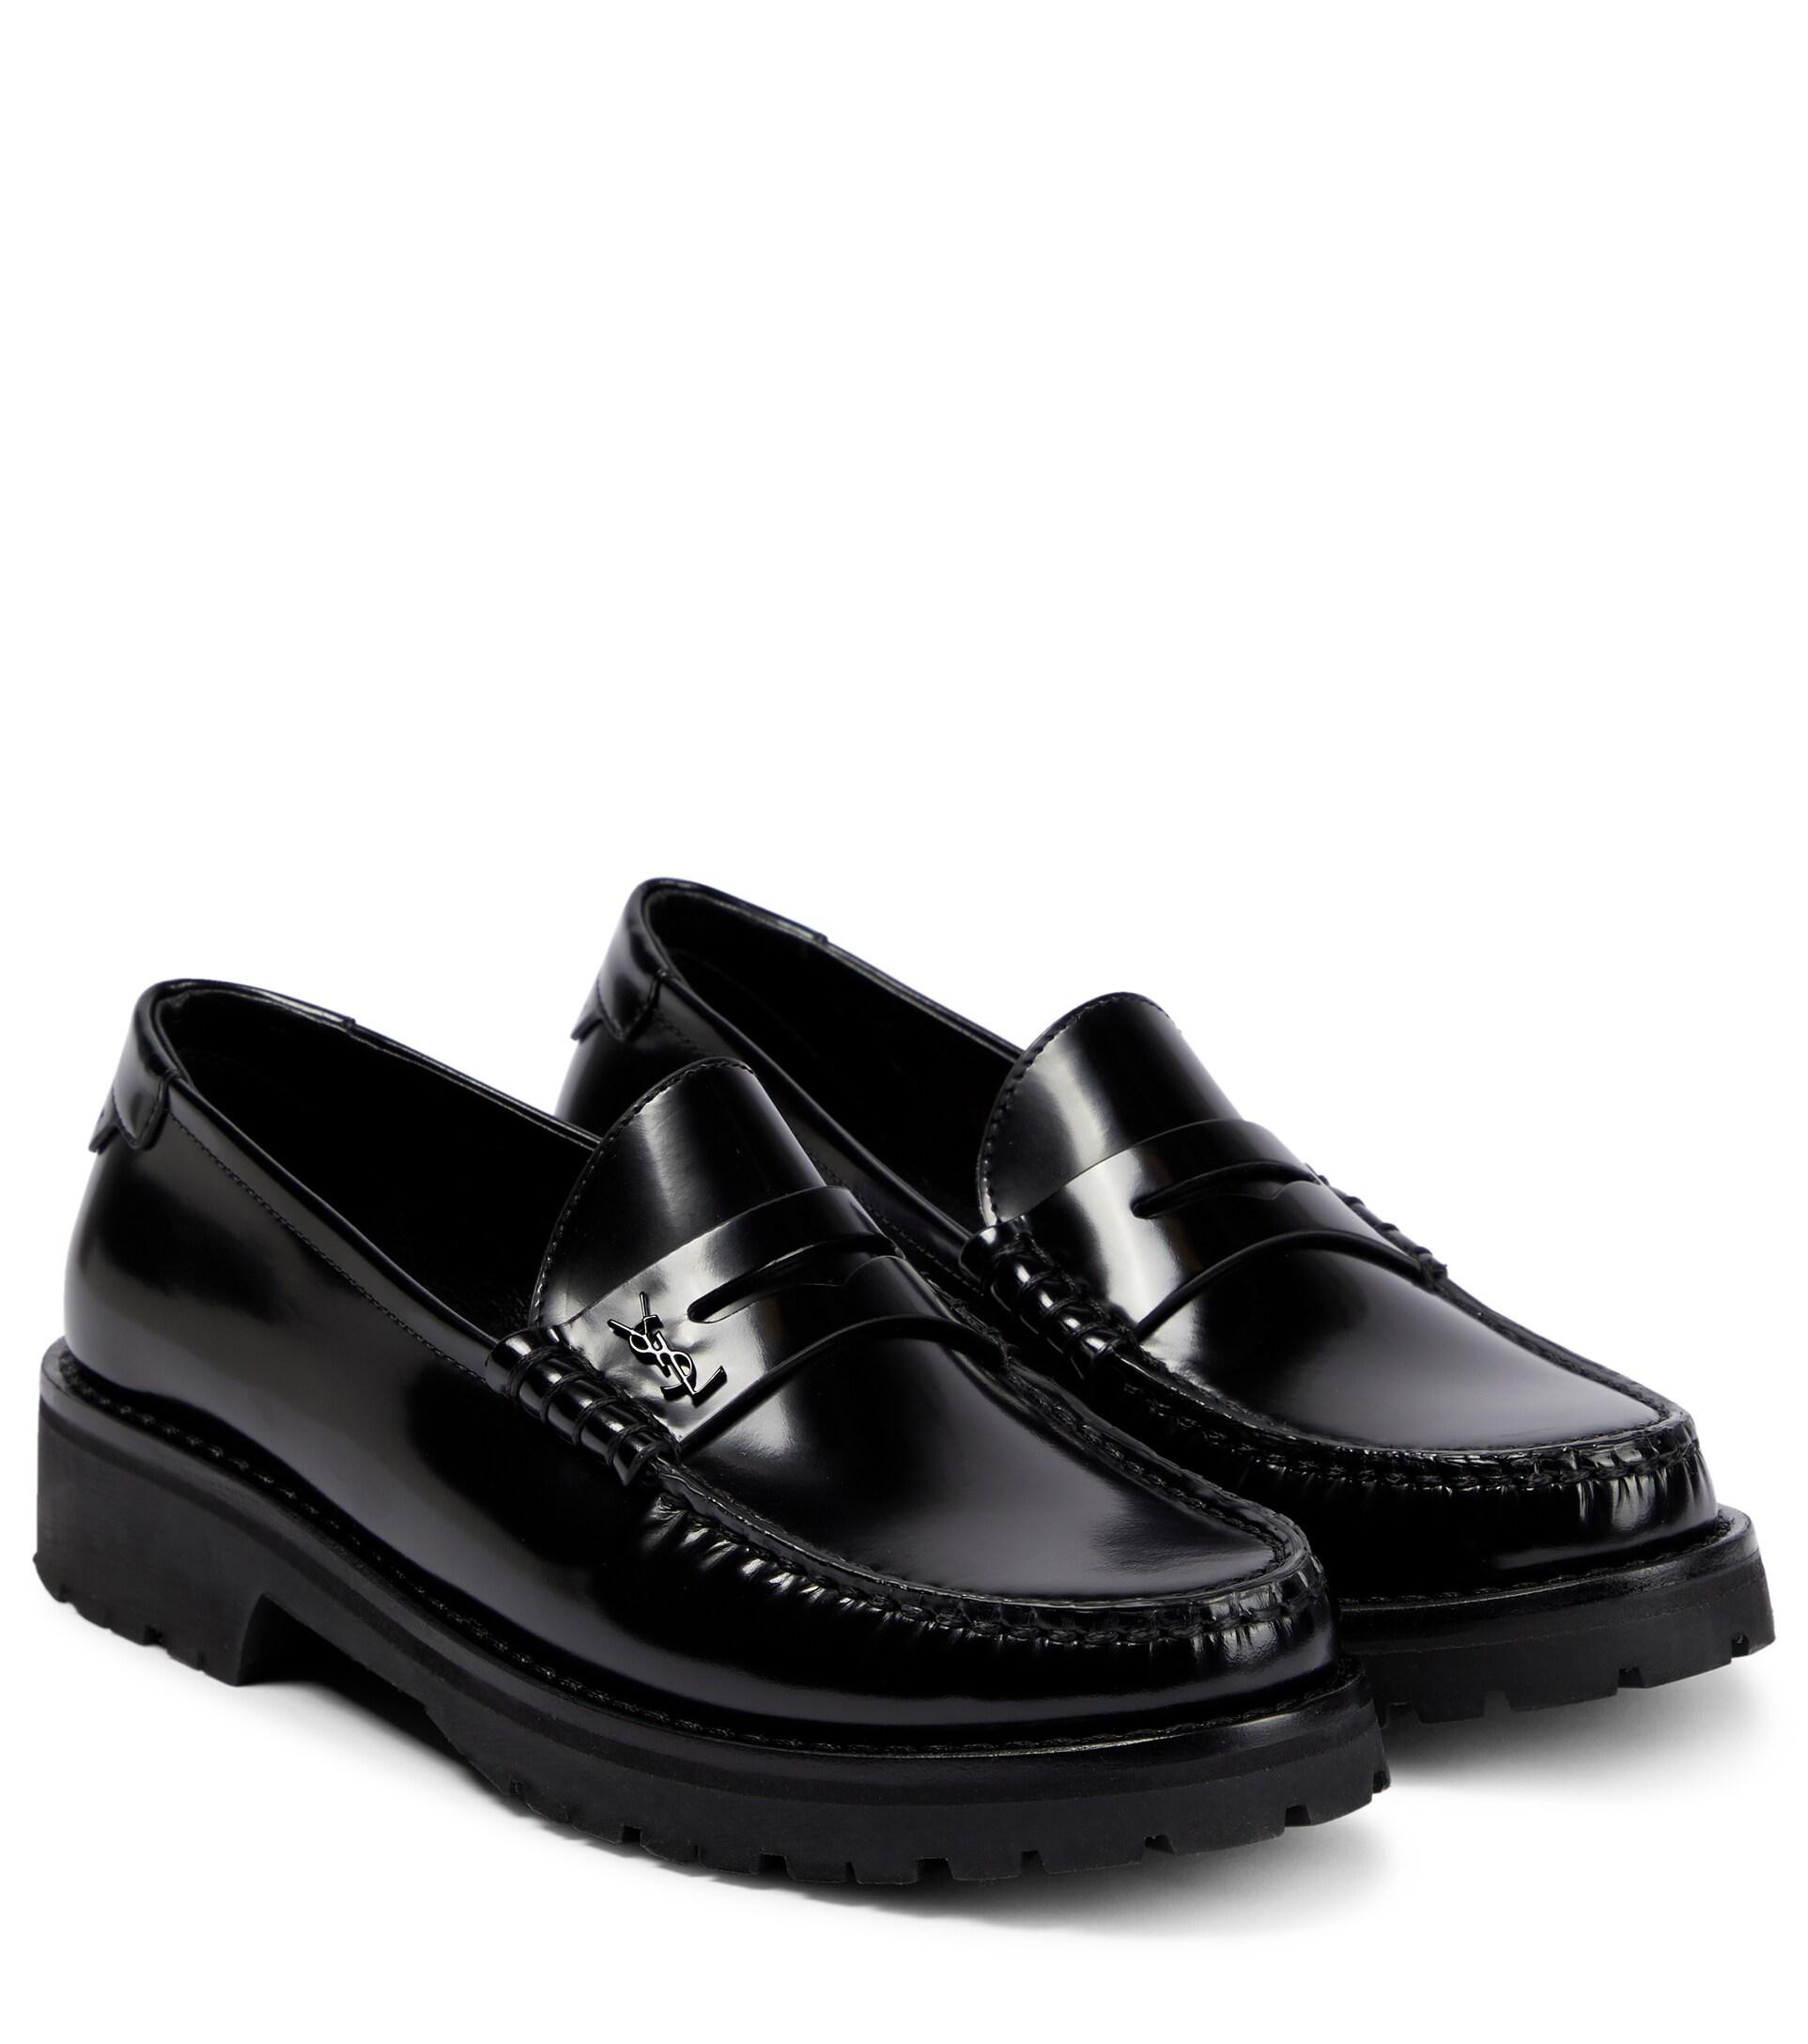 Saint Laurent Le Loafer Leather Penny Loafers in Black | Lyst